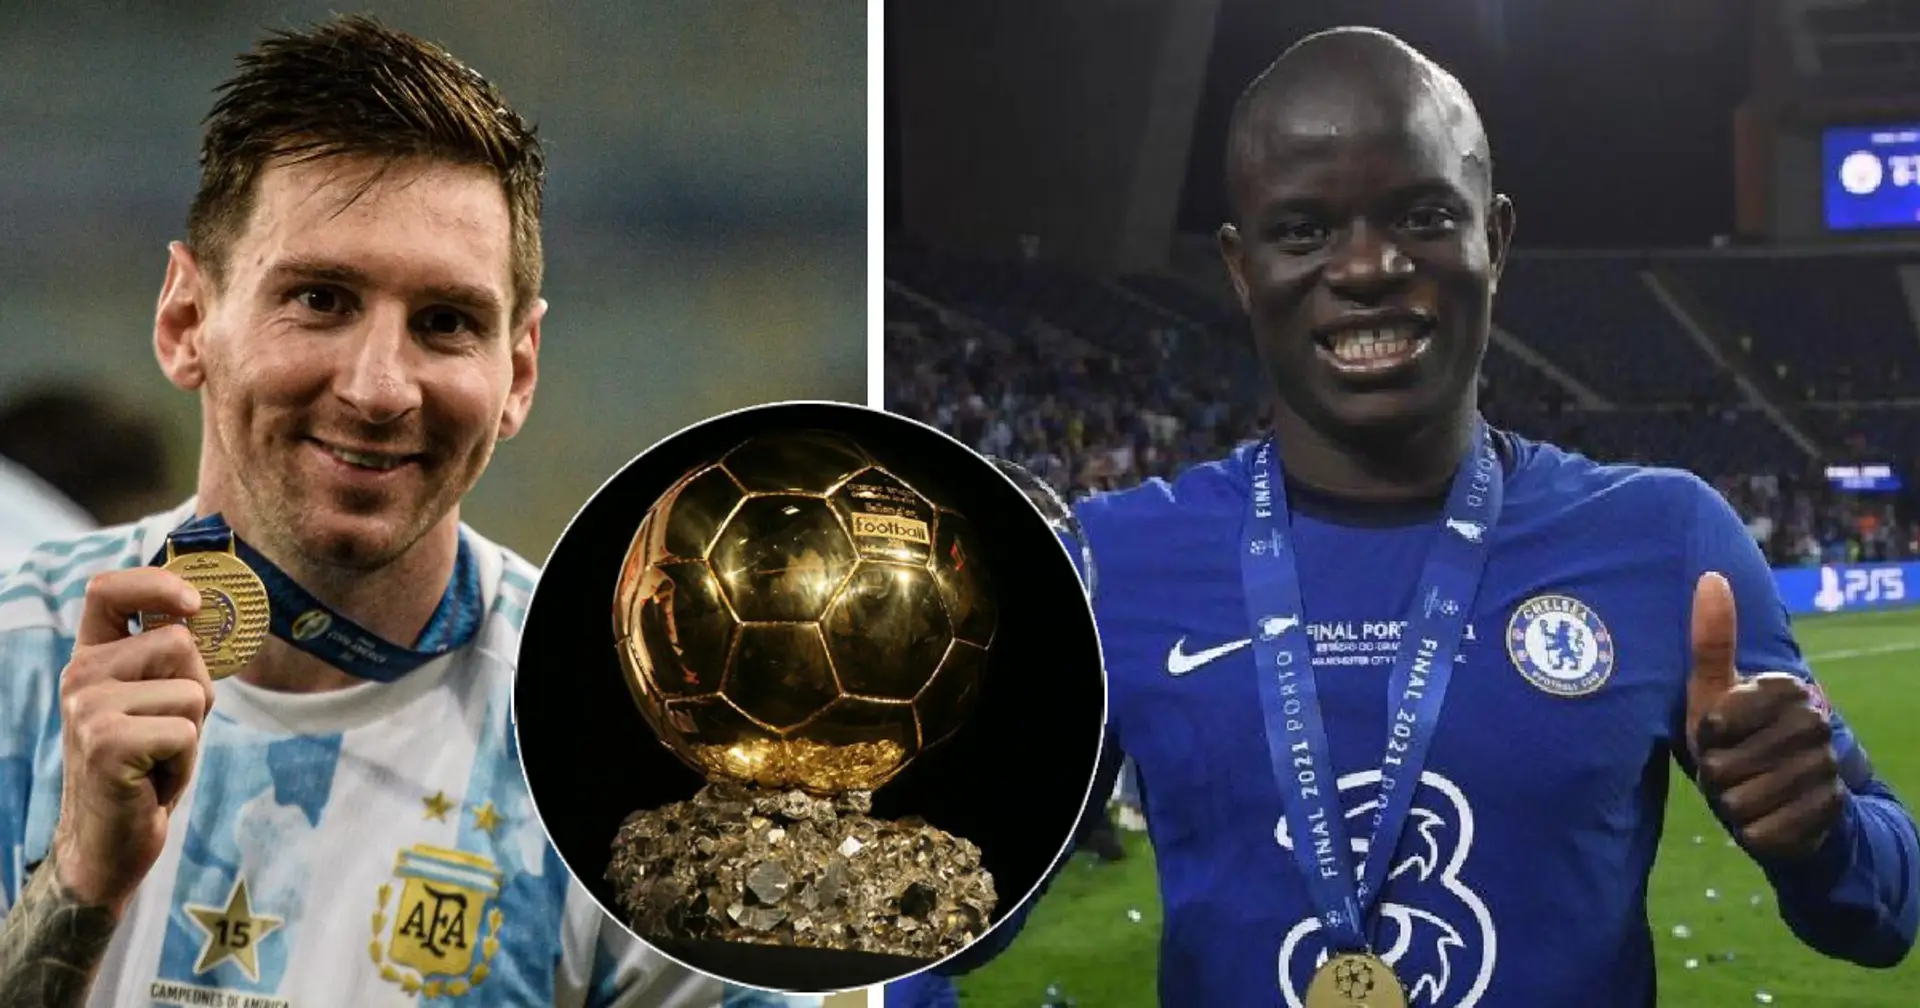 2020/21 Ballon d'Or odds: No Reds players in top 10, 5 Premier League stars included